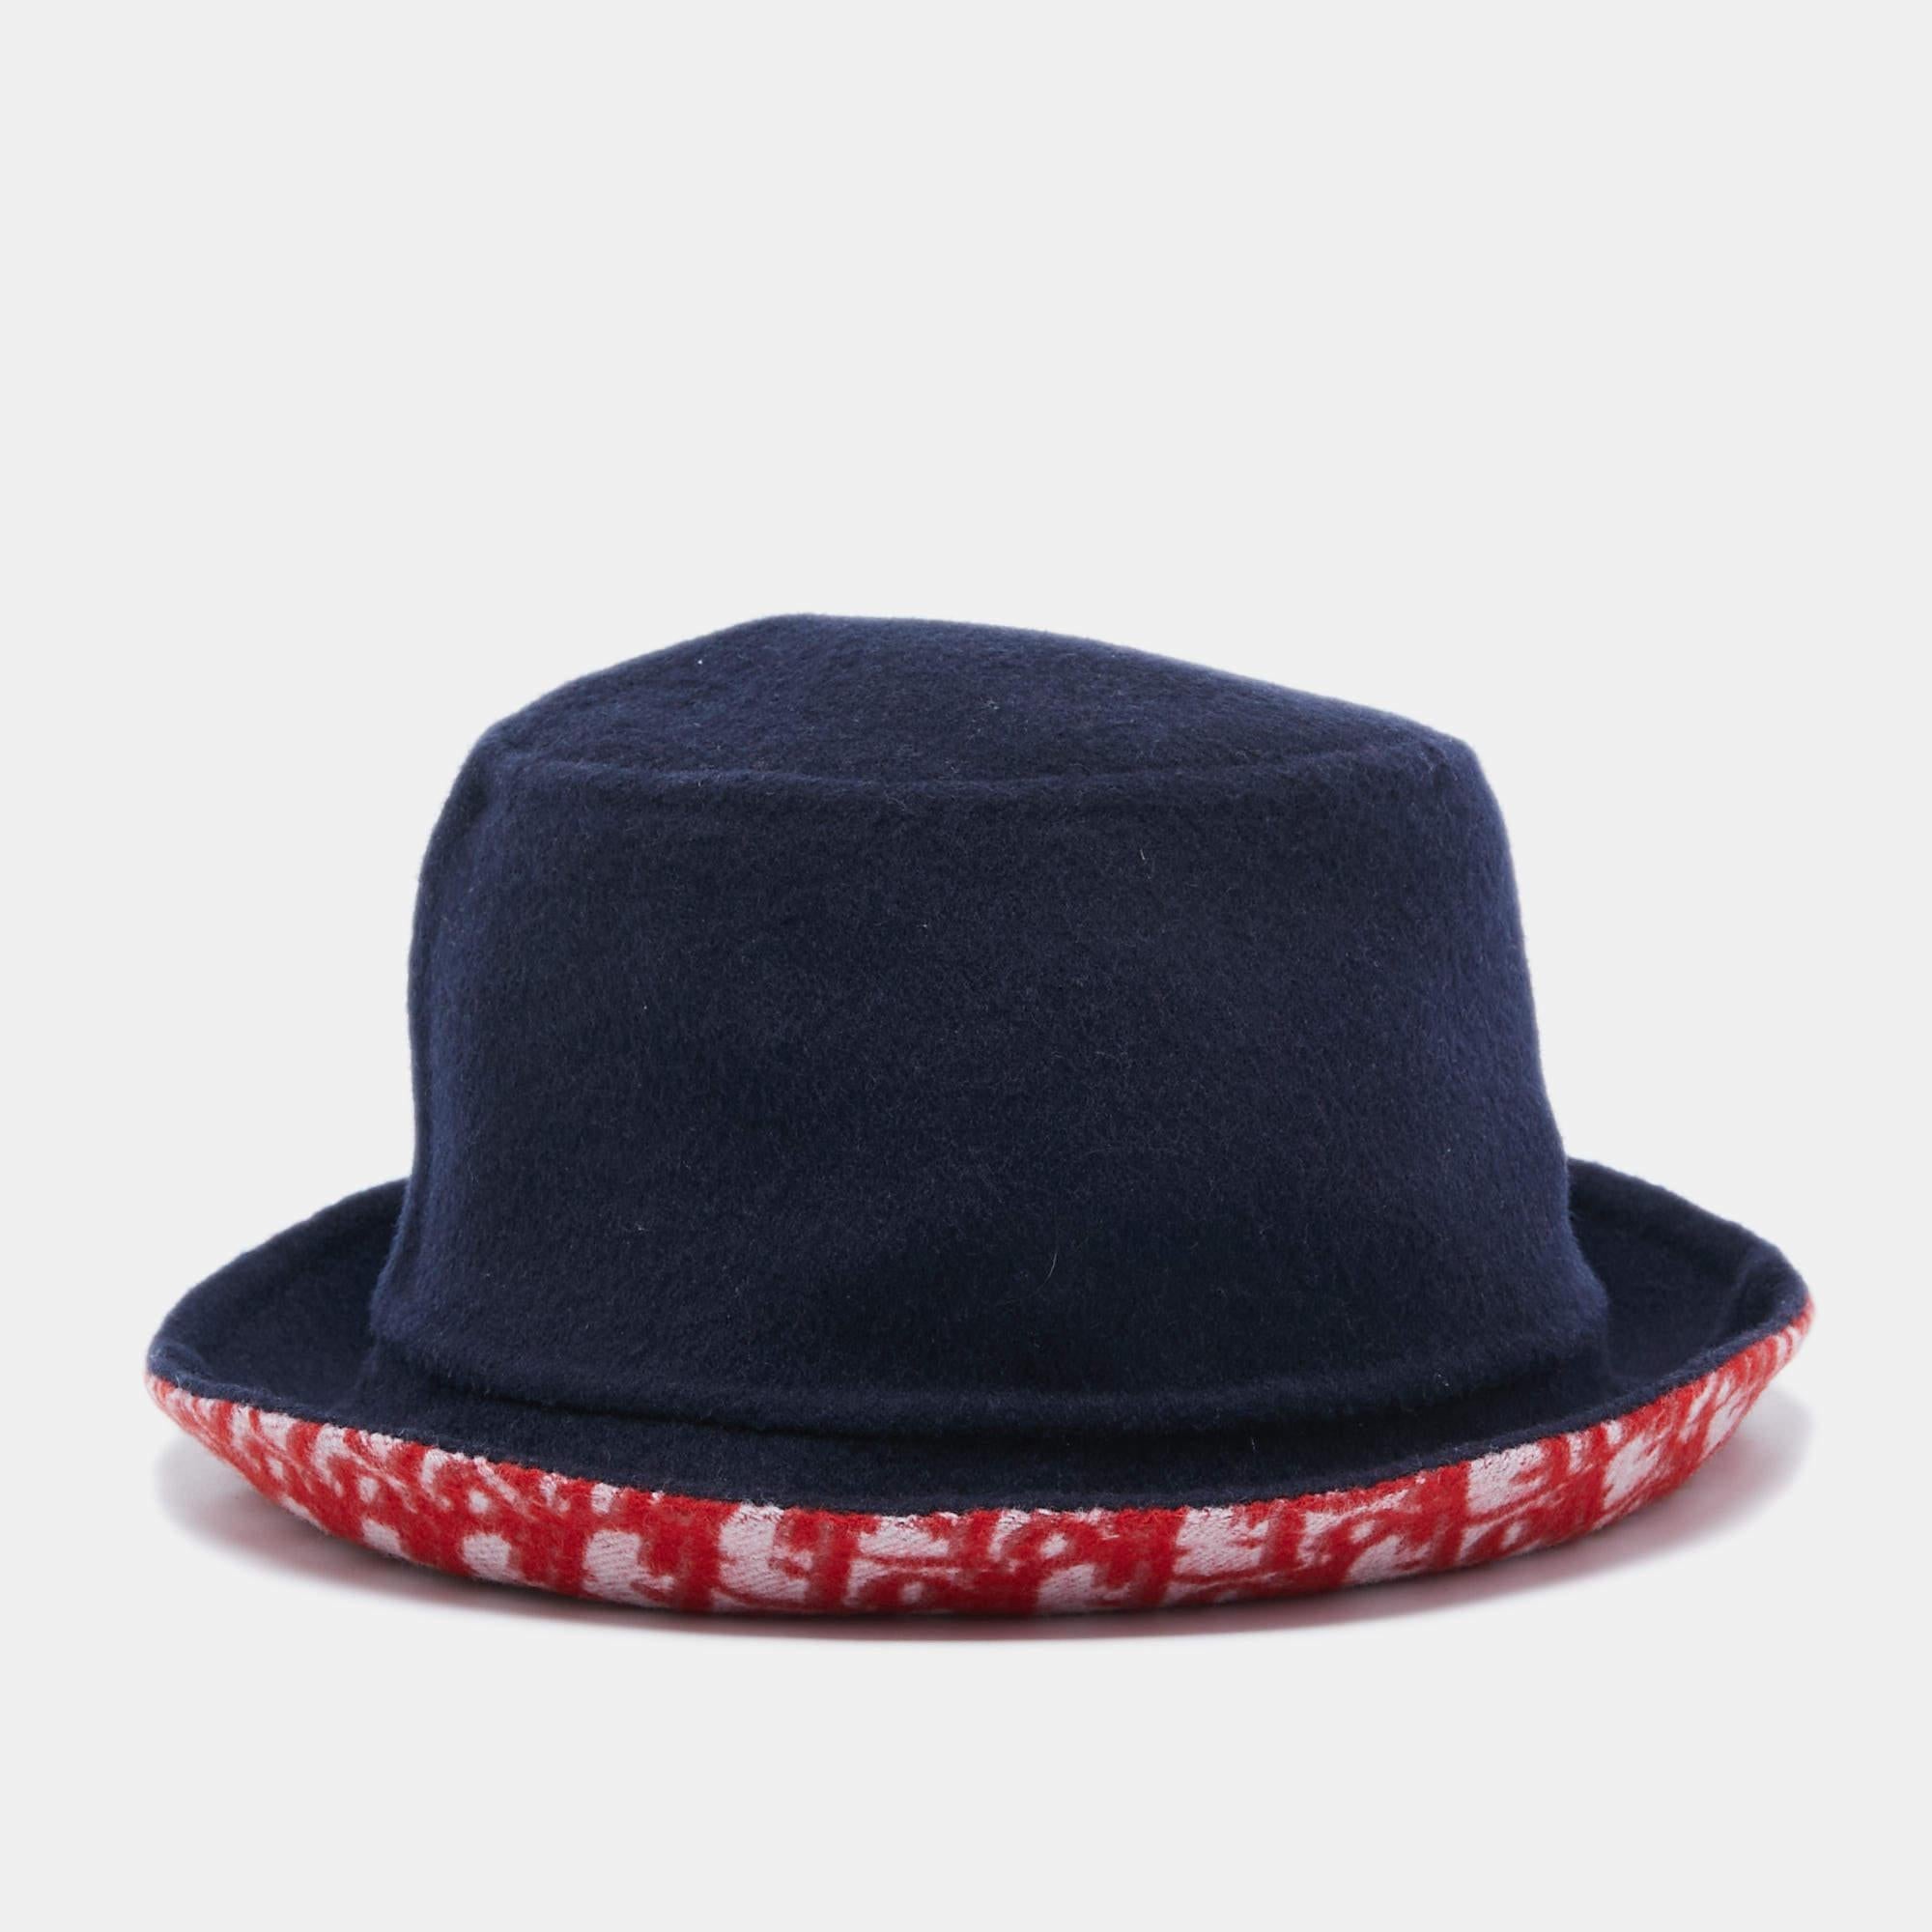 The Dior hat is a luxurious accessory blending style and versatility. Crafted with precision, it features the iconic Dior Oblique pattern on one side, offering a seamless transition between navy blue and red, ensuring a fashion-forward statement for